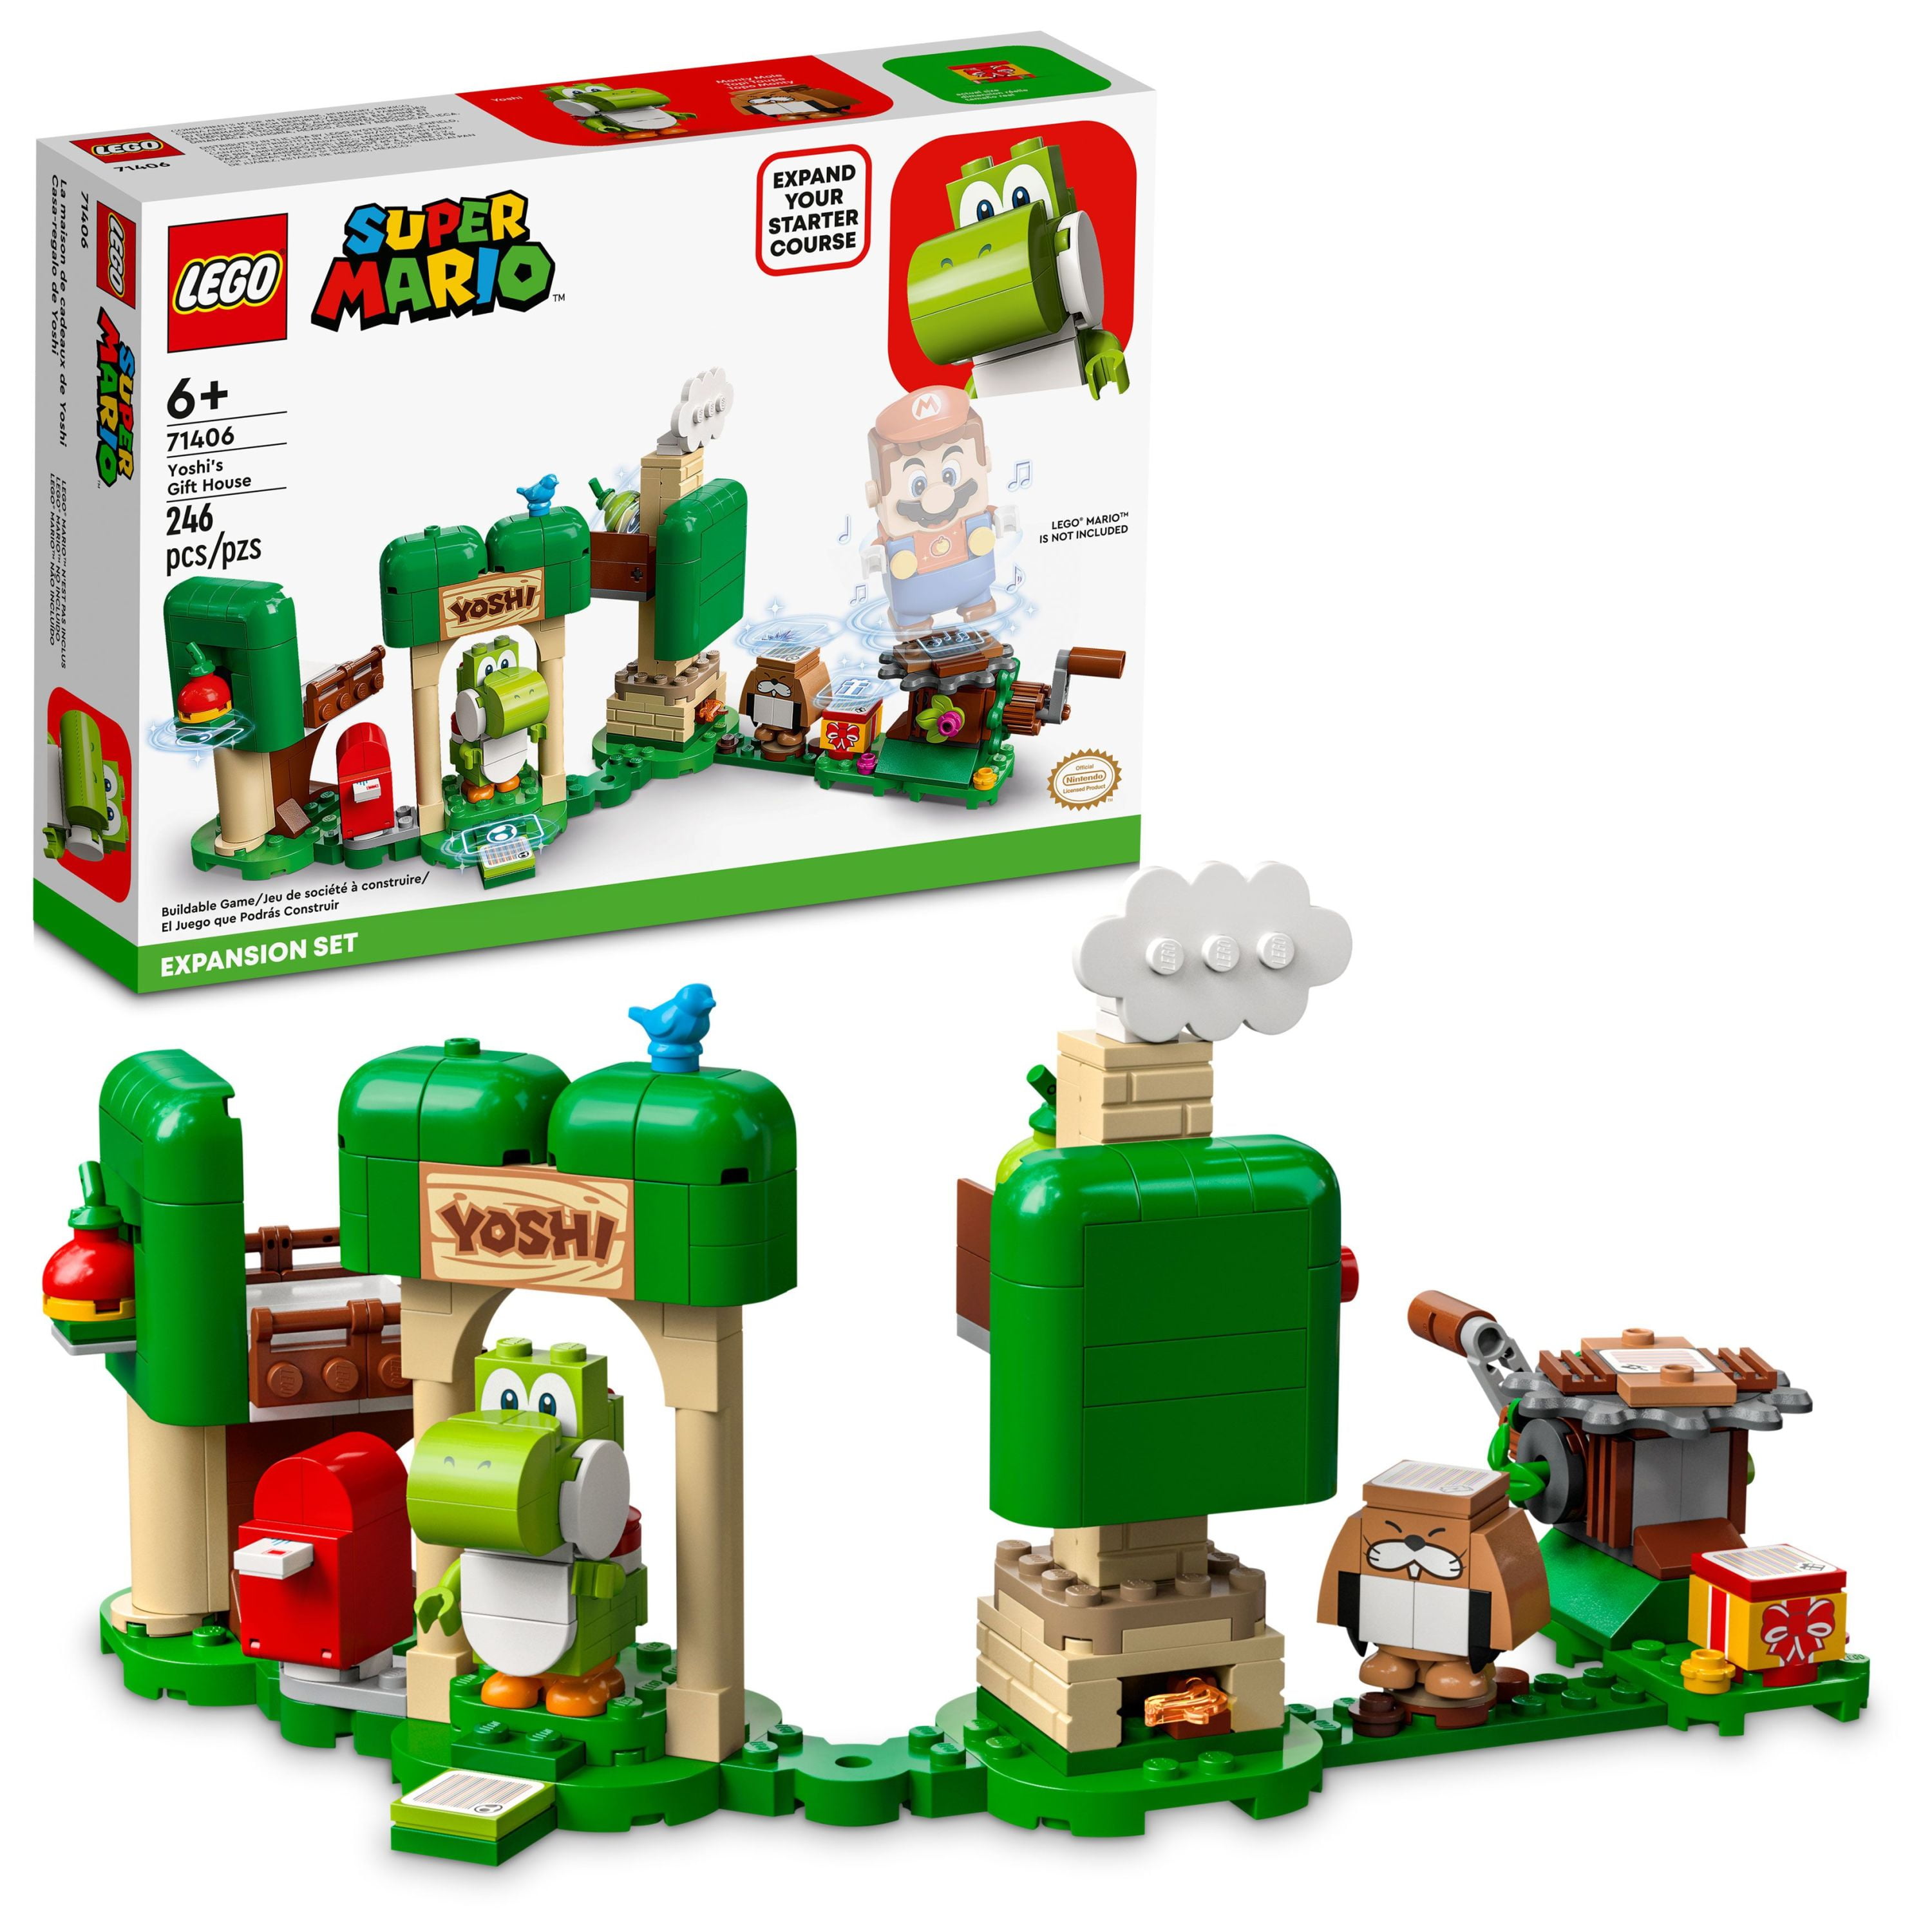 LEGO Super Mario Yoshi’s Gift House Expansion Set 71406, Collectible Set, Gifts for Kids, Girls, Boys 6 Plus Year Old with Yoshi and Monty Mole Figures